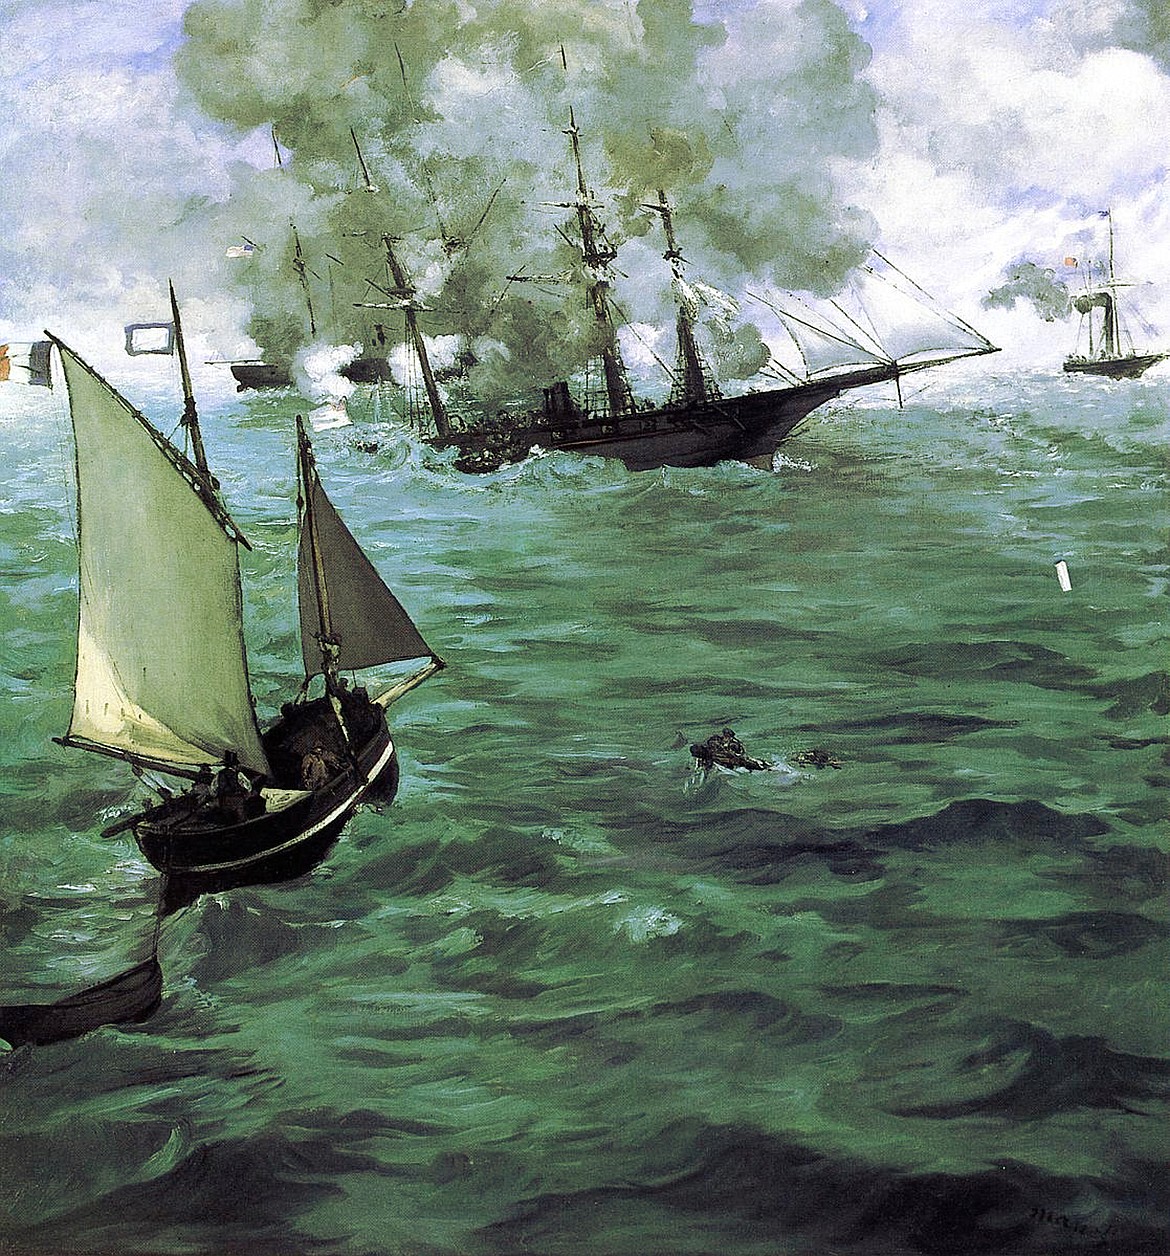 Painting by French impressionist Édouard Manet of American Civil War naval battle fought that he is said to have witnessed off the coast of Cherbourg, France, with Union warship USS Kearsarge sinking the Confederate CSS Alabama on June 19, 1864.